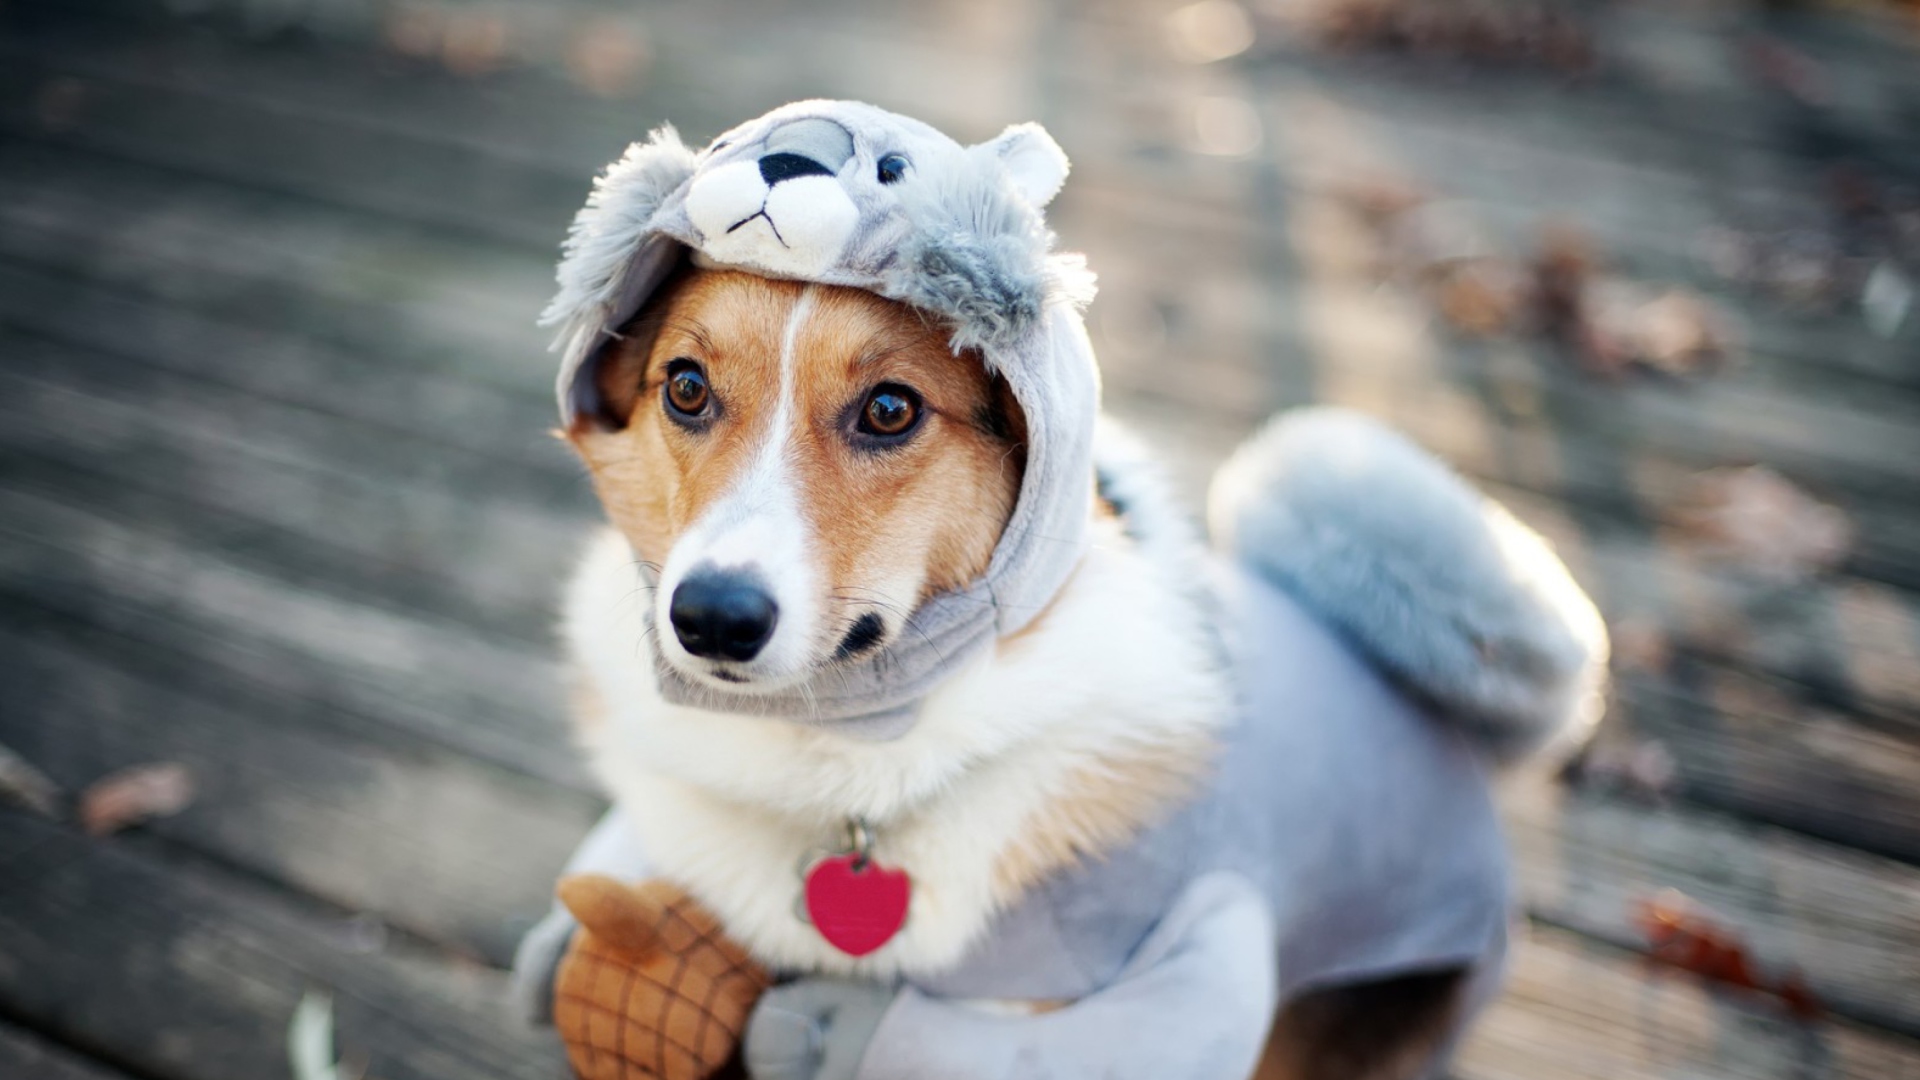 Dog In Funny Costume wallpaper 1920x1080